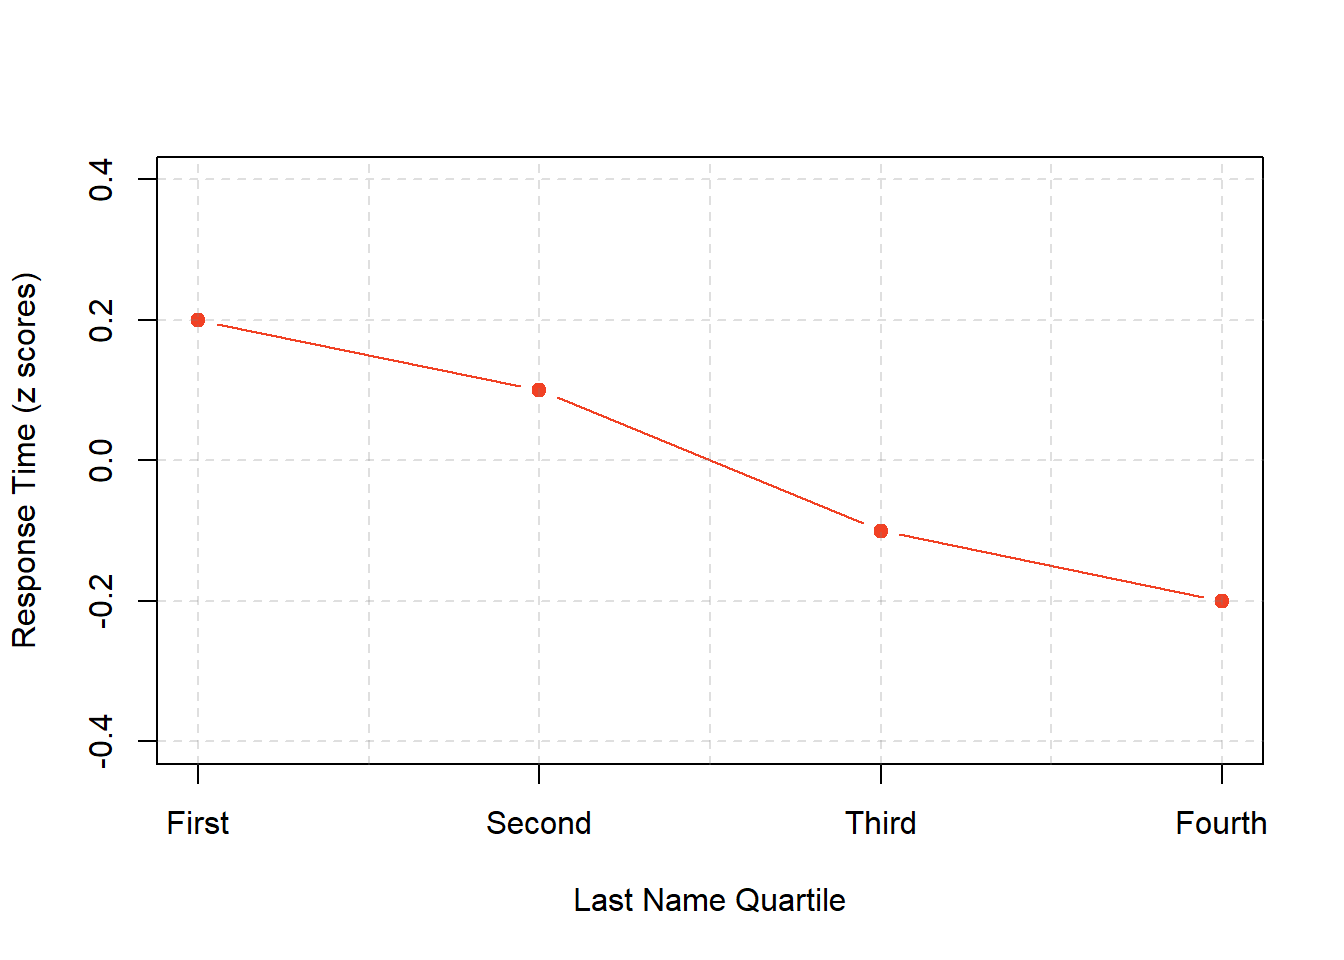 Line graph showing the relationship between the alphabetical position of people’s last names and how quickly those people respond to offers of consumer goods.